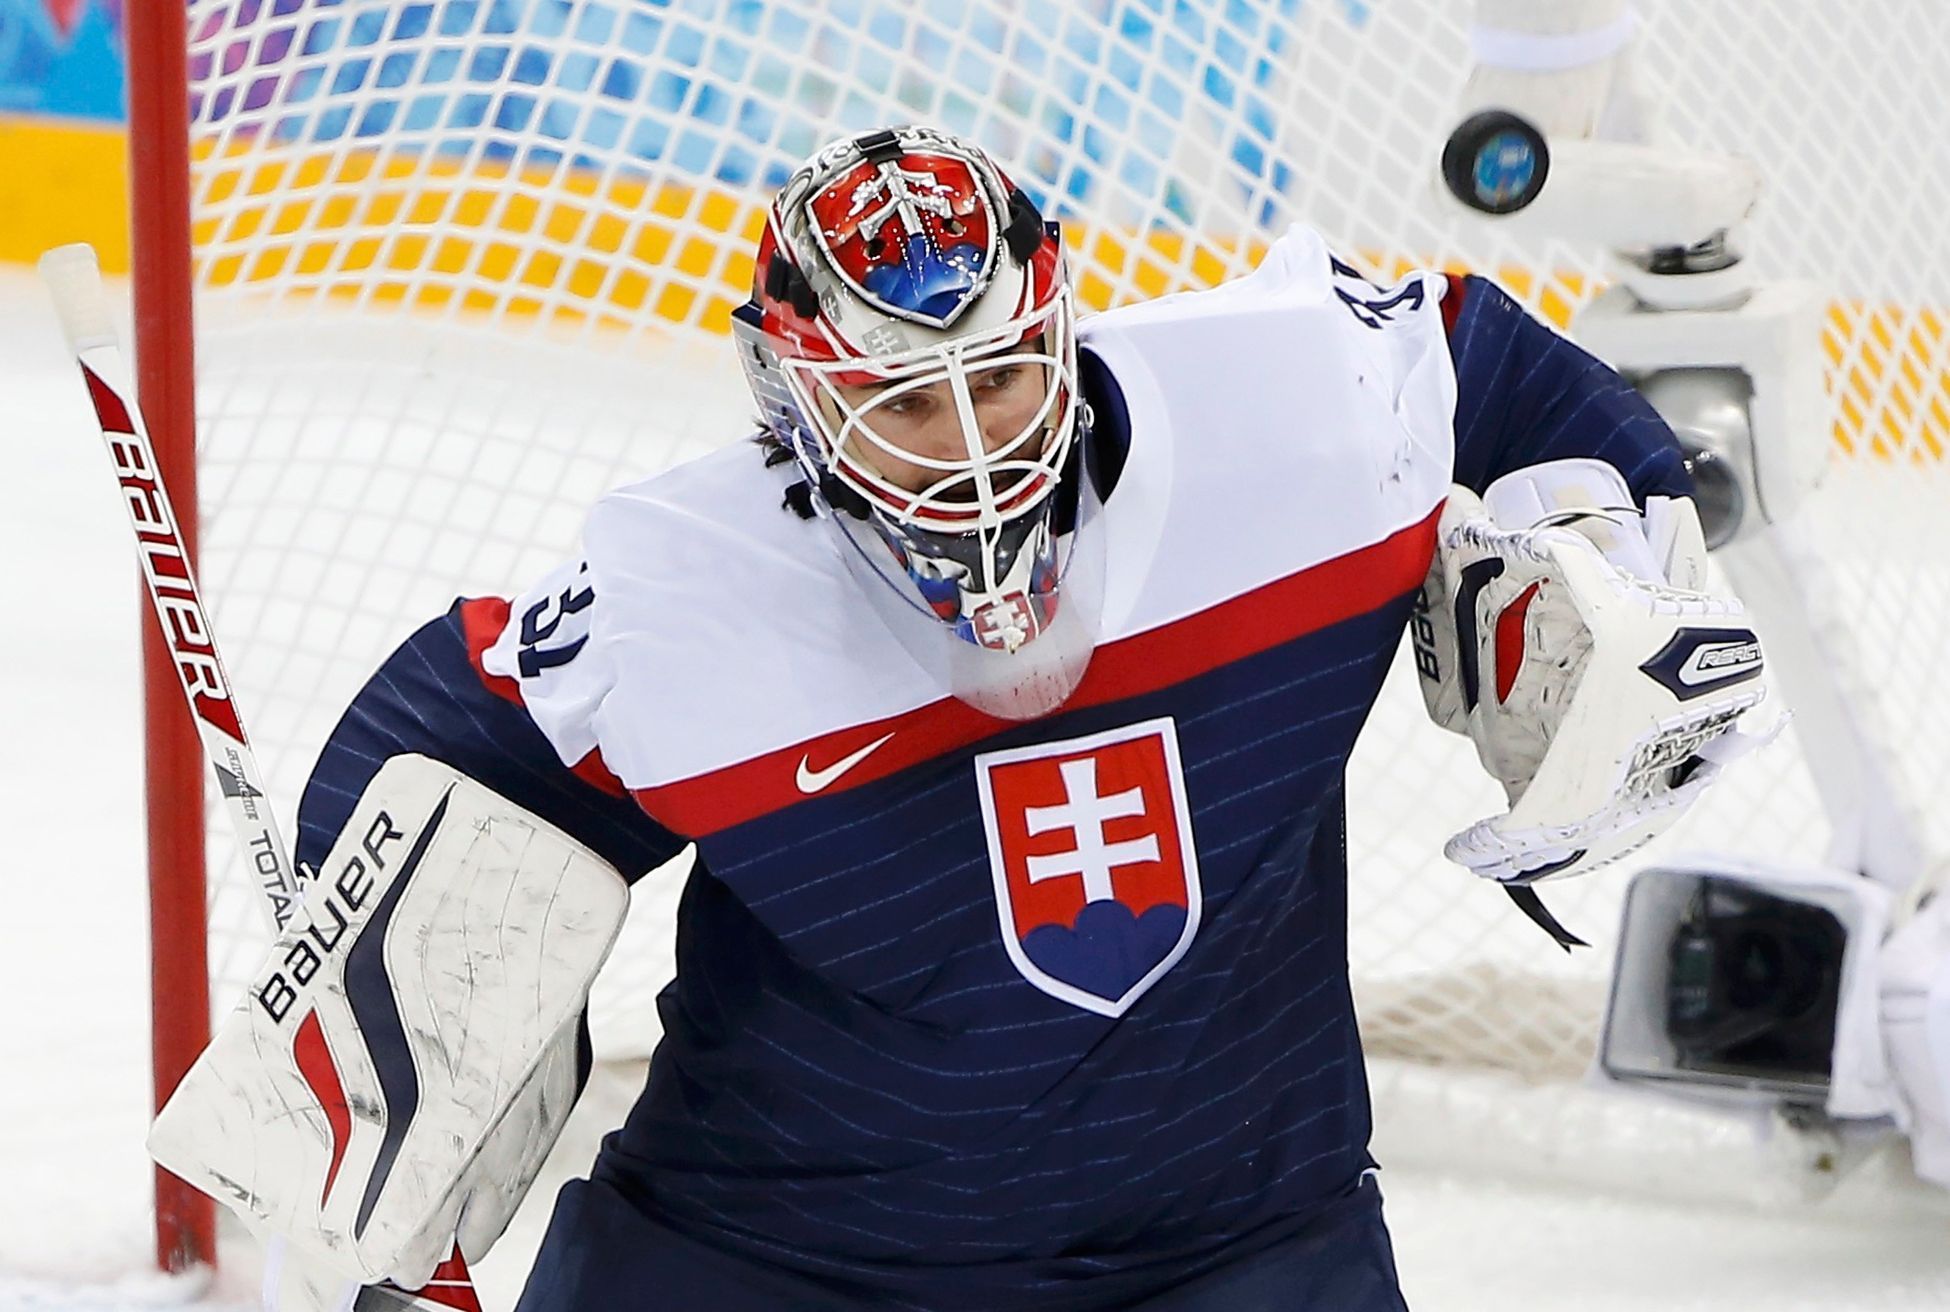 Slovakia's goalie Peter Budaj makes a save against Team USA during their men's preliminary round ice hockey game at the 2014 Sochi Winter Olympics